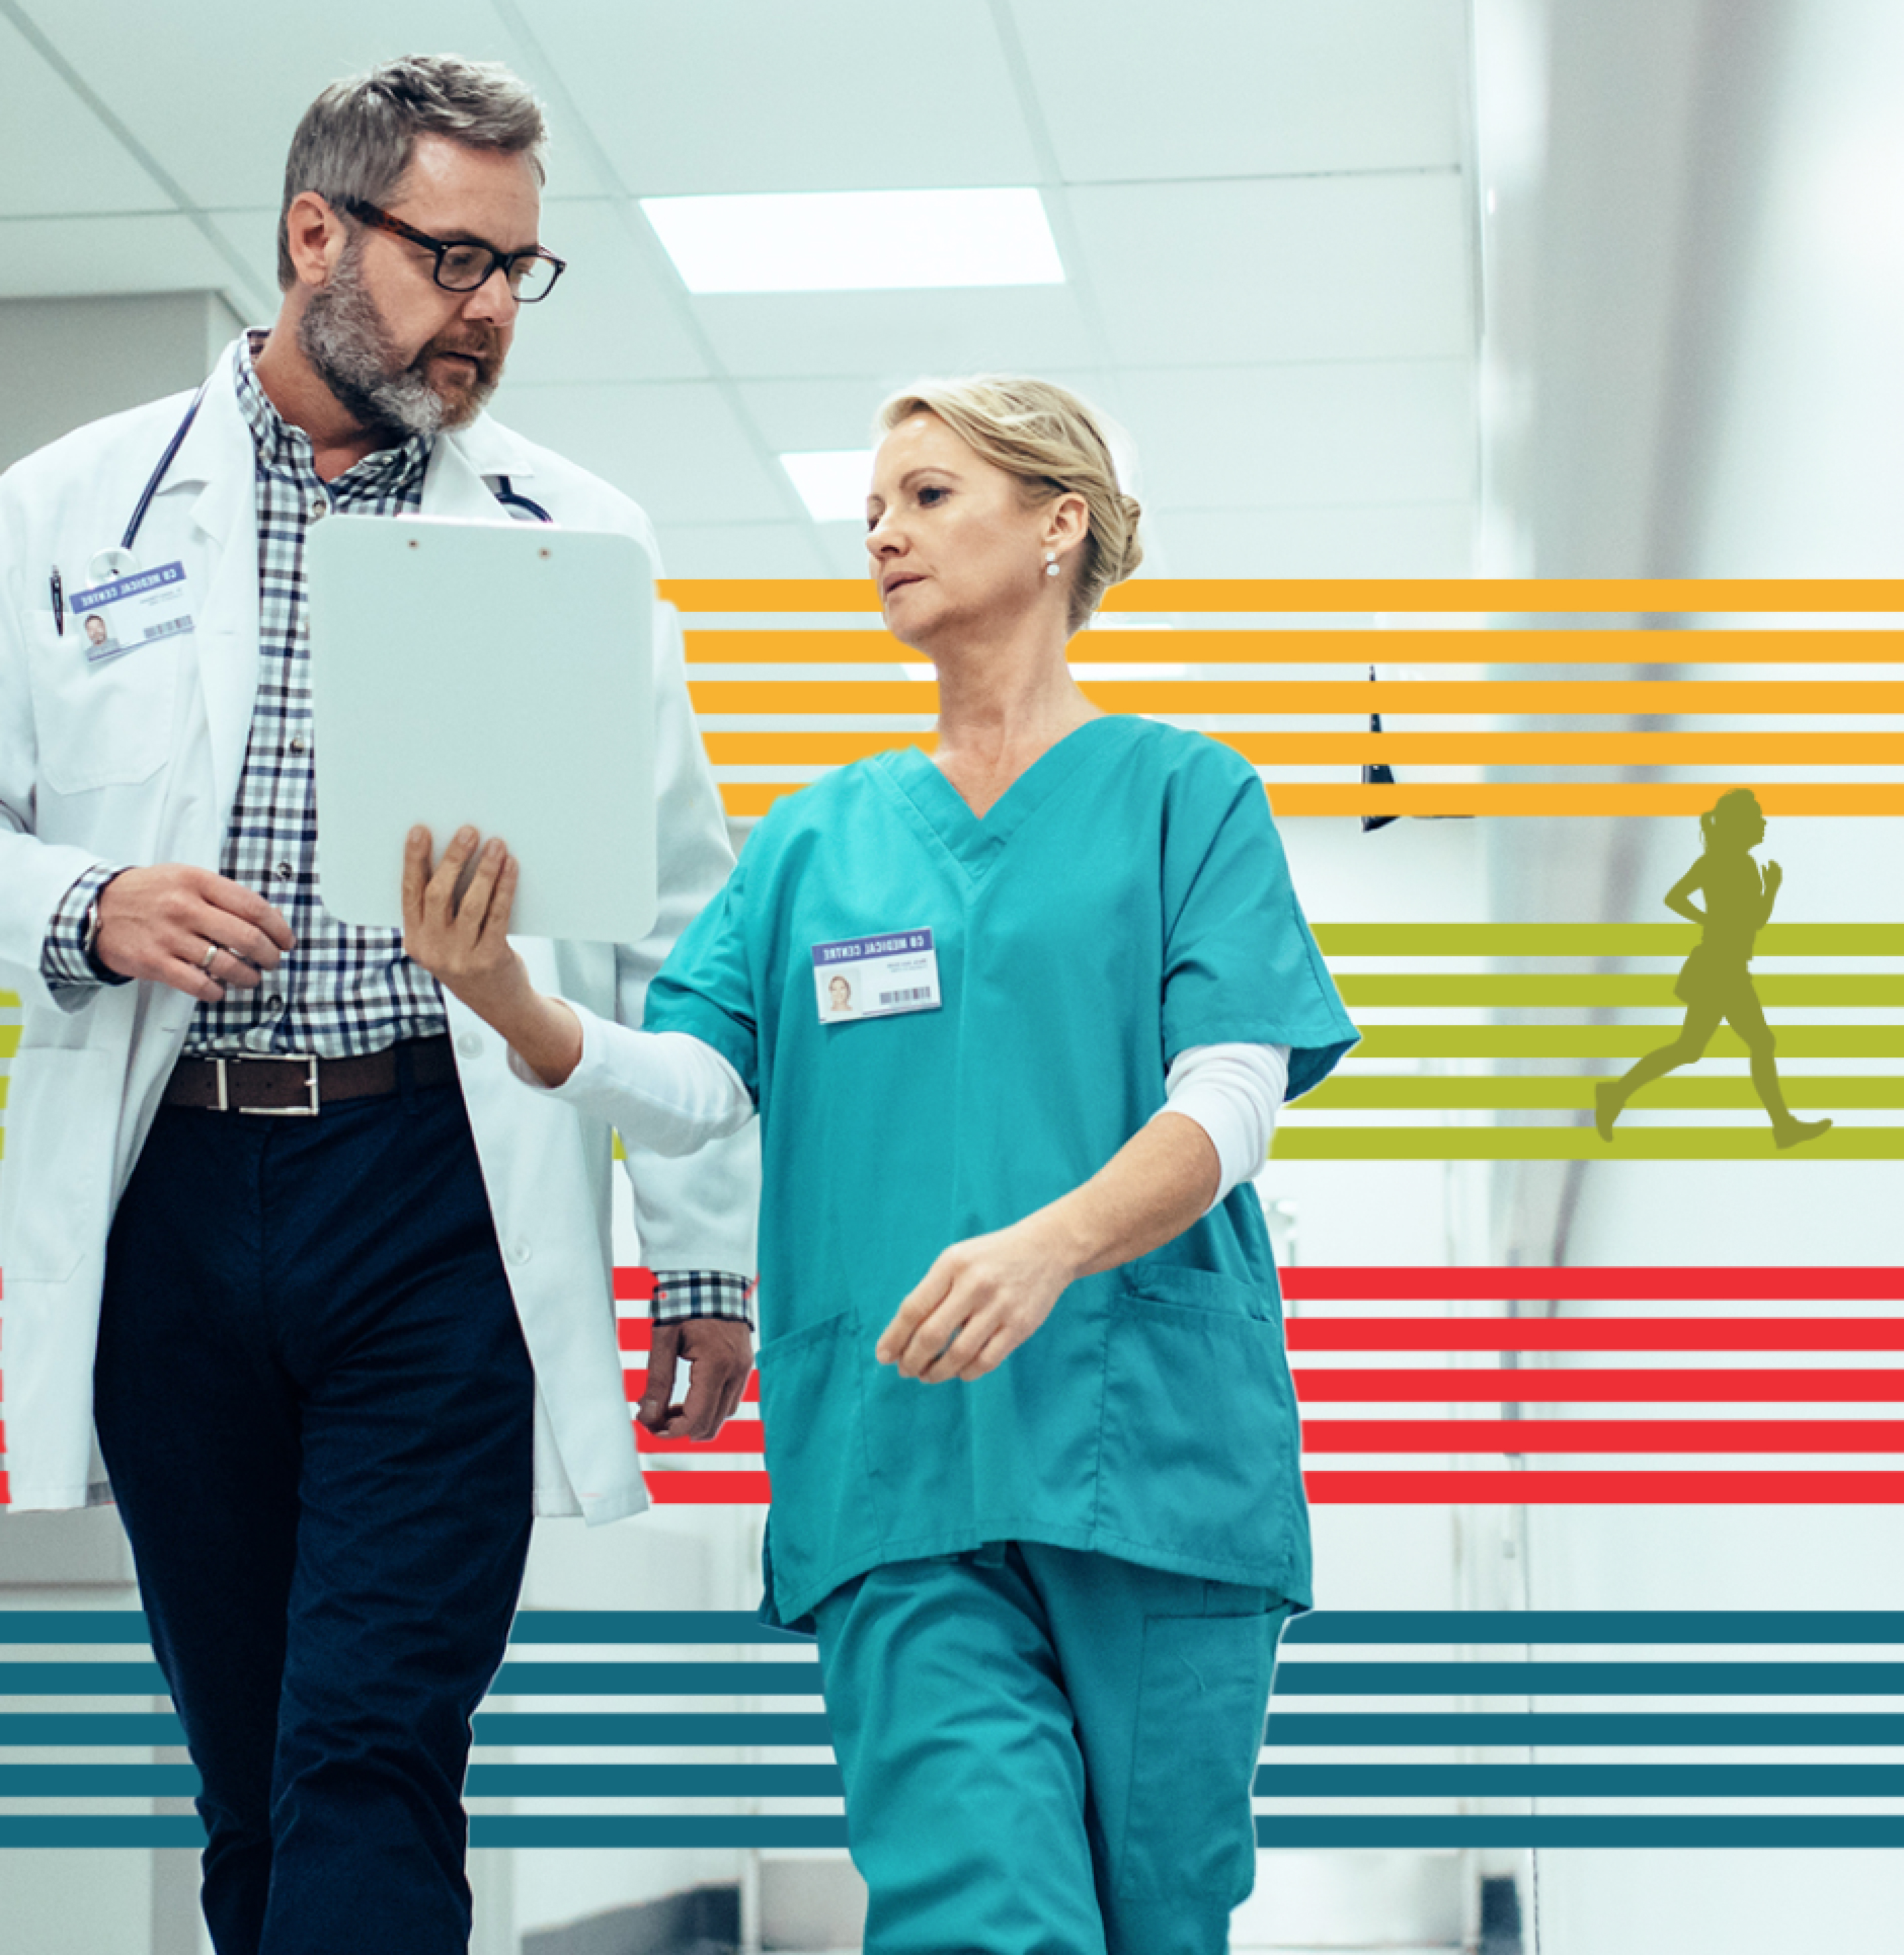 Two medical professionals talk in a hallway filled with stylized arrows in the Thermo Fisher Scientific Oncomine colors